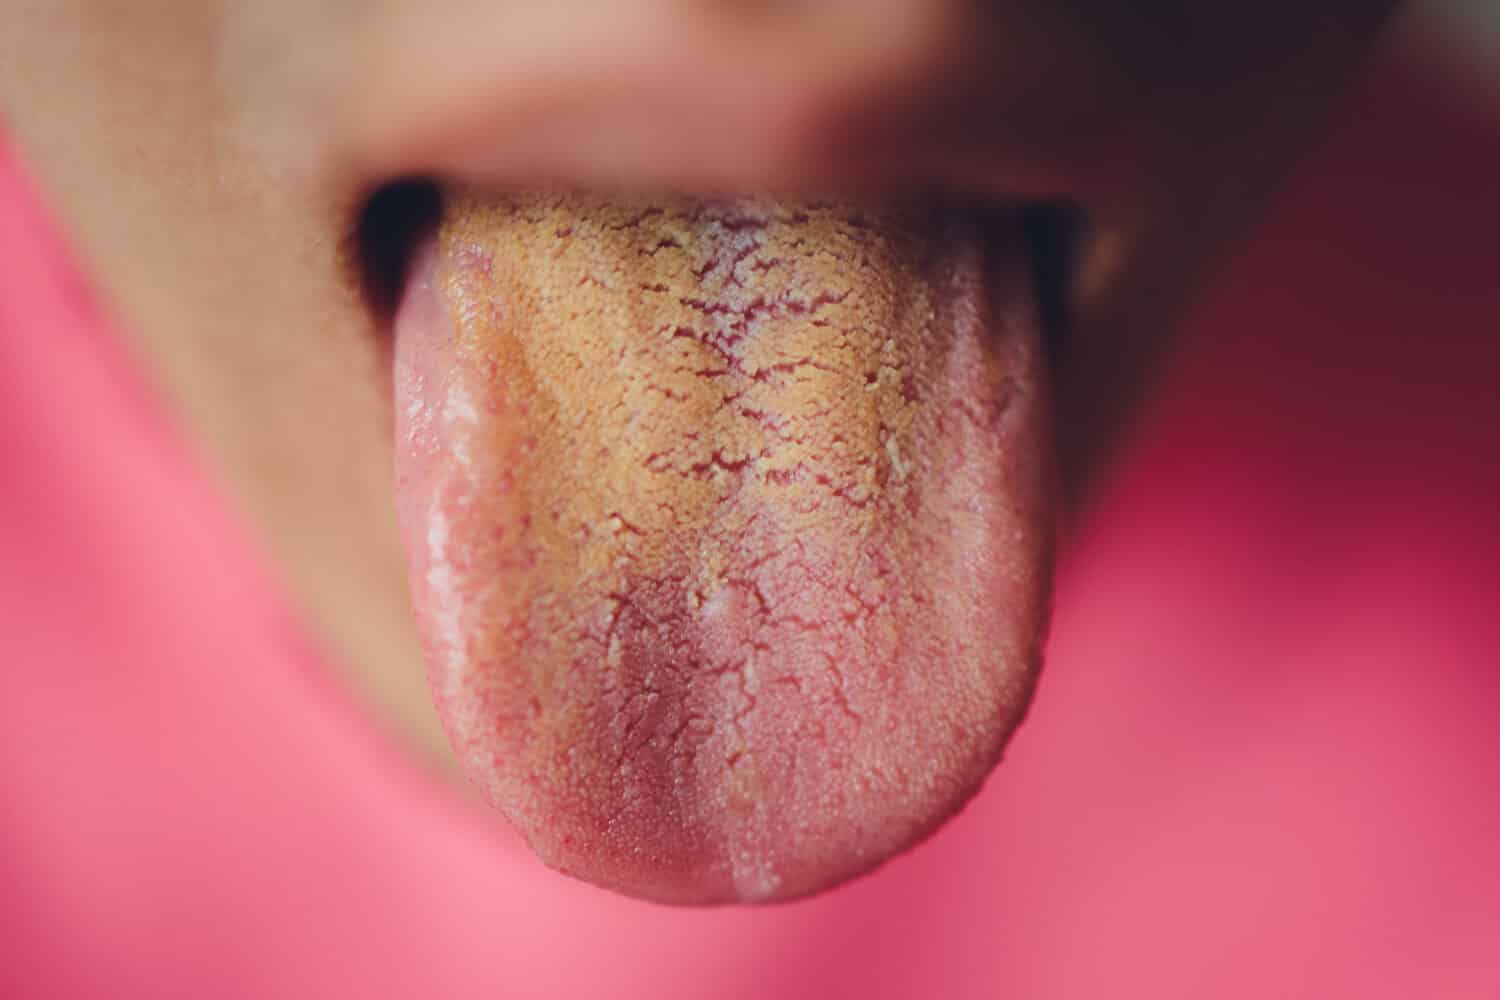 dirty tongue, close-up, yellow due to illness.